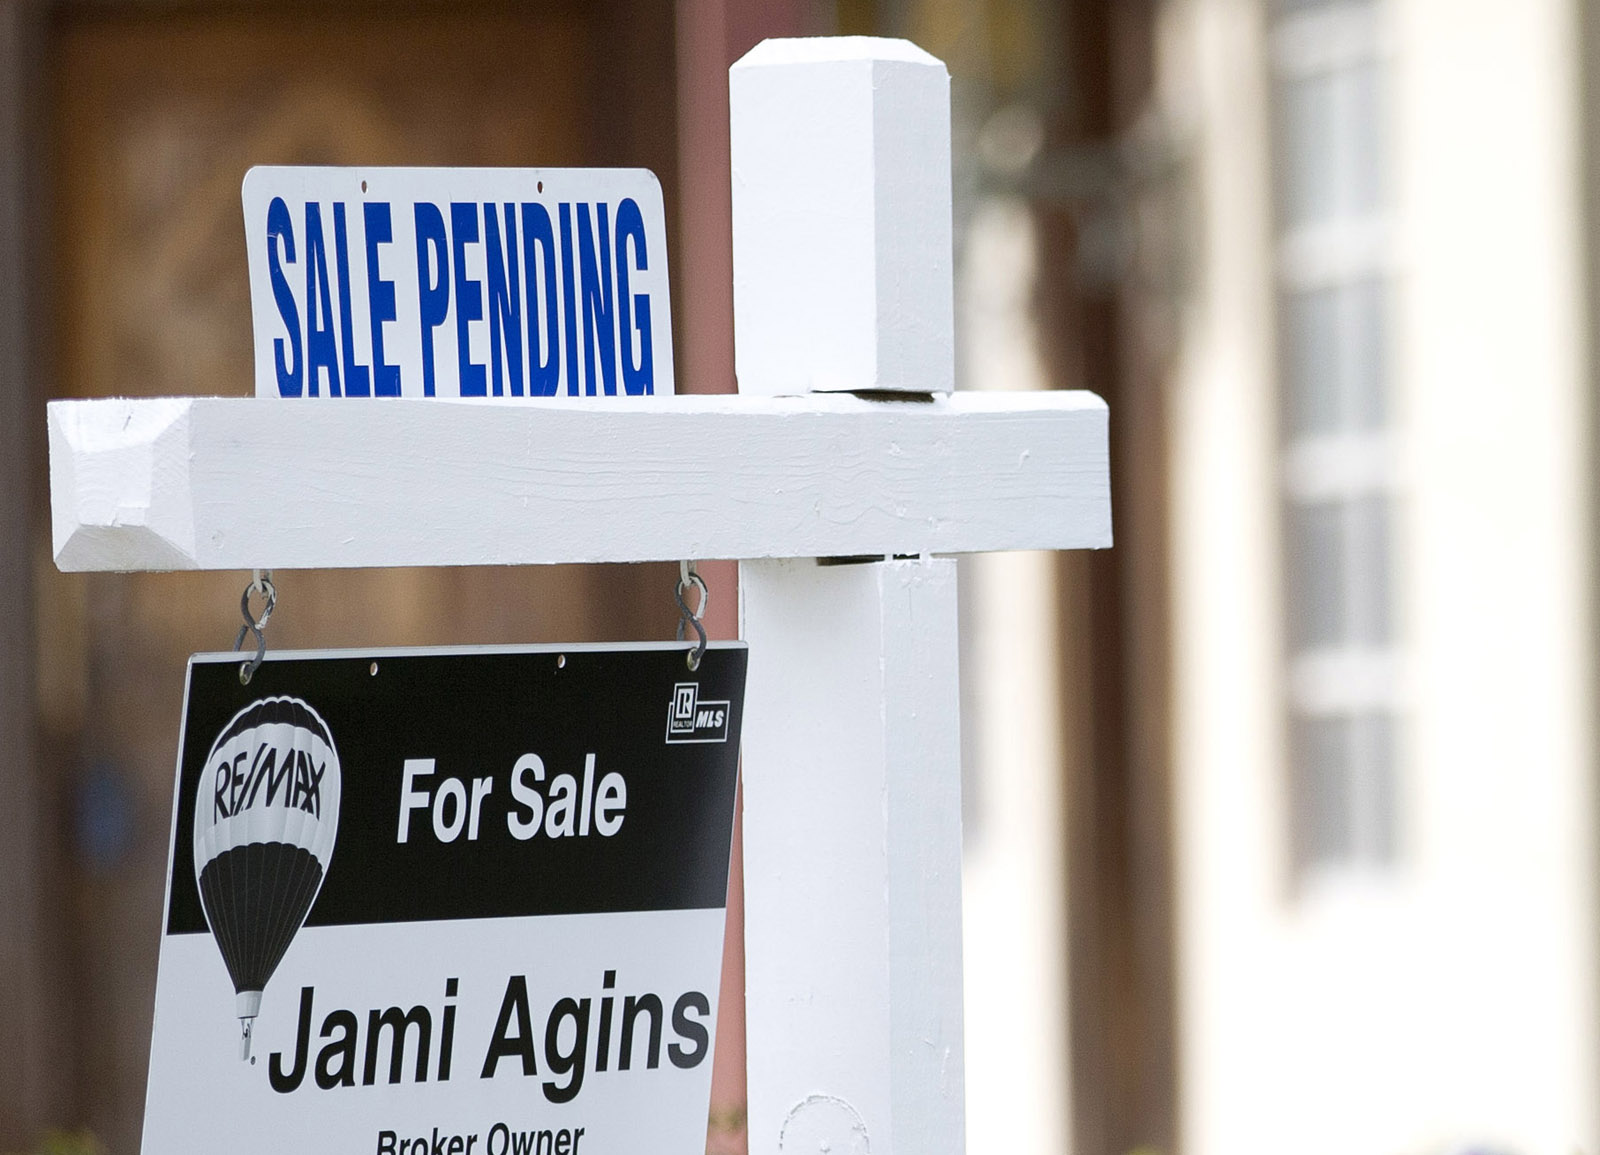 FILE - In this Thursday, Jan. 8, 2015, file photo, a "Sale Pending" sign sits atop a realty sign outside a home for sale in Surfside, Fla. The National Association of Realtors releases its March 2016 report on pending home sales on Wednesday, April 27, 2016. (AP Photo/Wilfredo Lee, File)